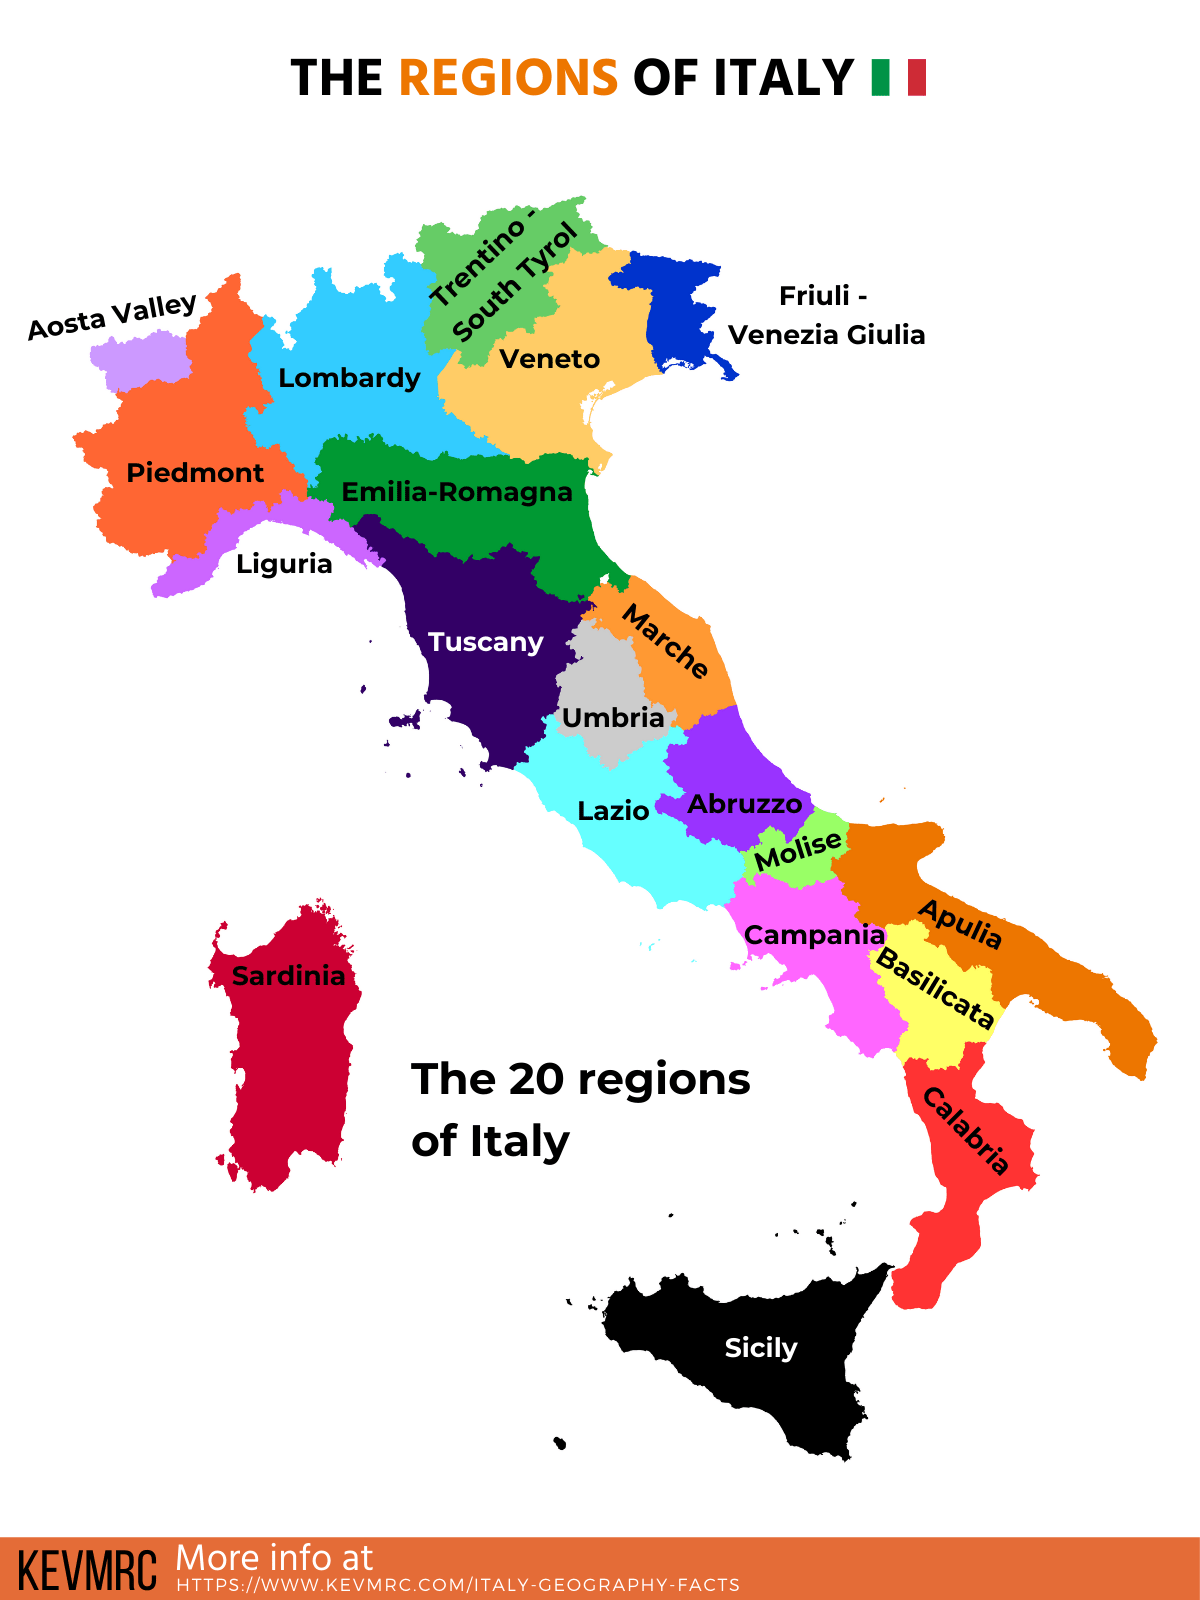 illustration about the regions of italy